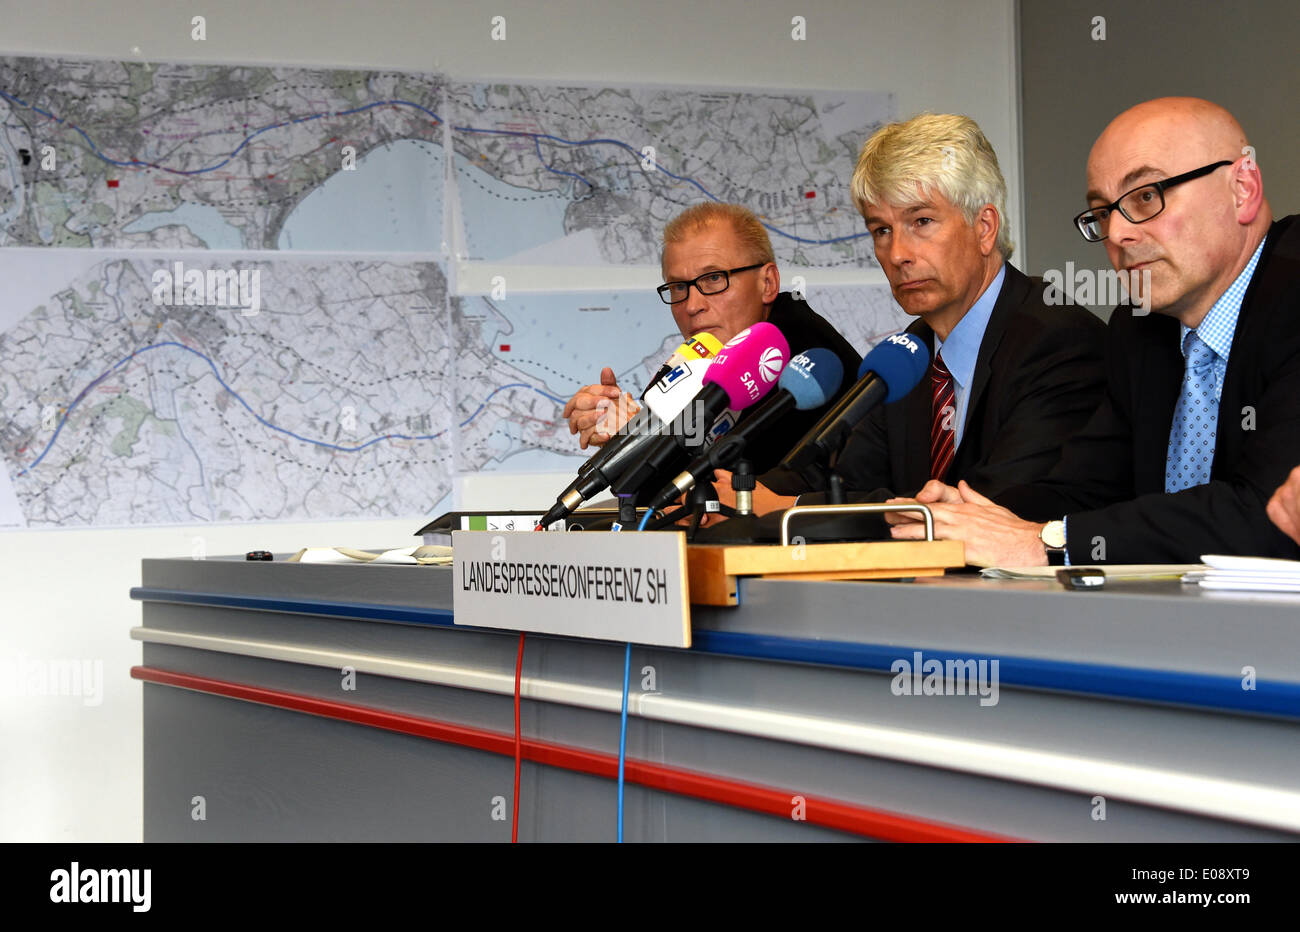 Kiel, Germany. 06th May, 2013. Director of the state planning board Ernst Hansen (L-R), secretary of state for transport Frank Naegele and Premier of Schleswig-Holstein Torsten Albig during the press conference in Kiel, Germany, 06 MAy 2013. The plans for a railway route to connect to the Fehmarn Belt bridge was unveiled after the cabinet meeting. Photo: CARSTEN REHDER/dpa/Alamy Live News Stock Photo